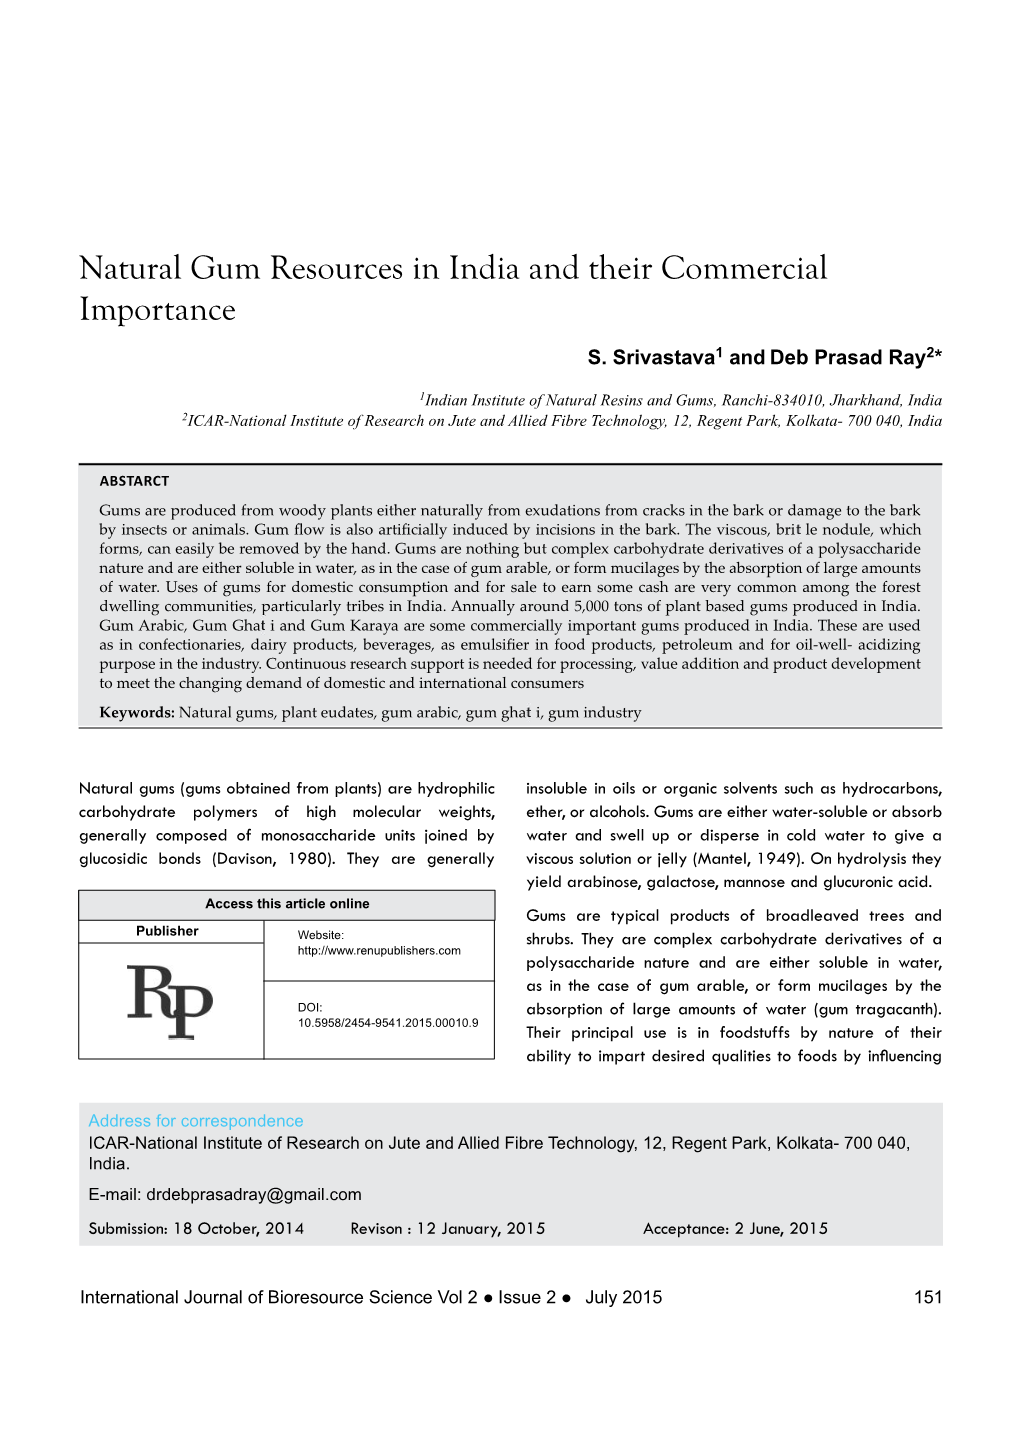 Natural Gum Resources in India and Their Commercial Importance